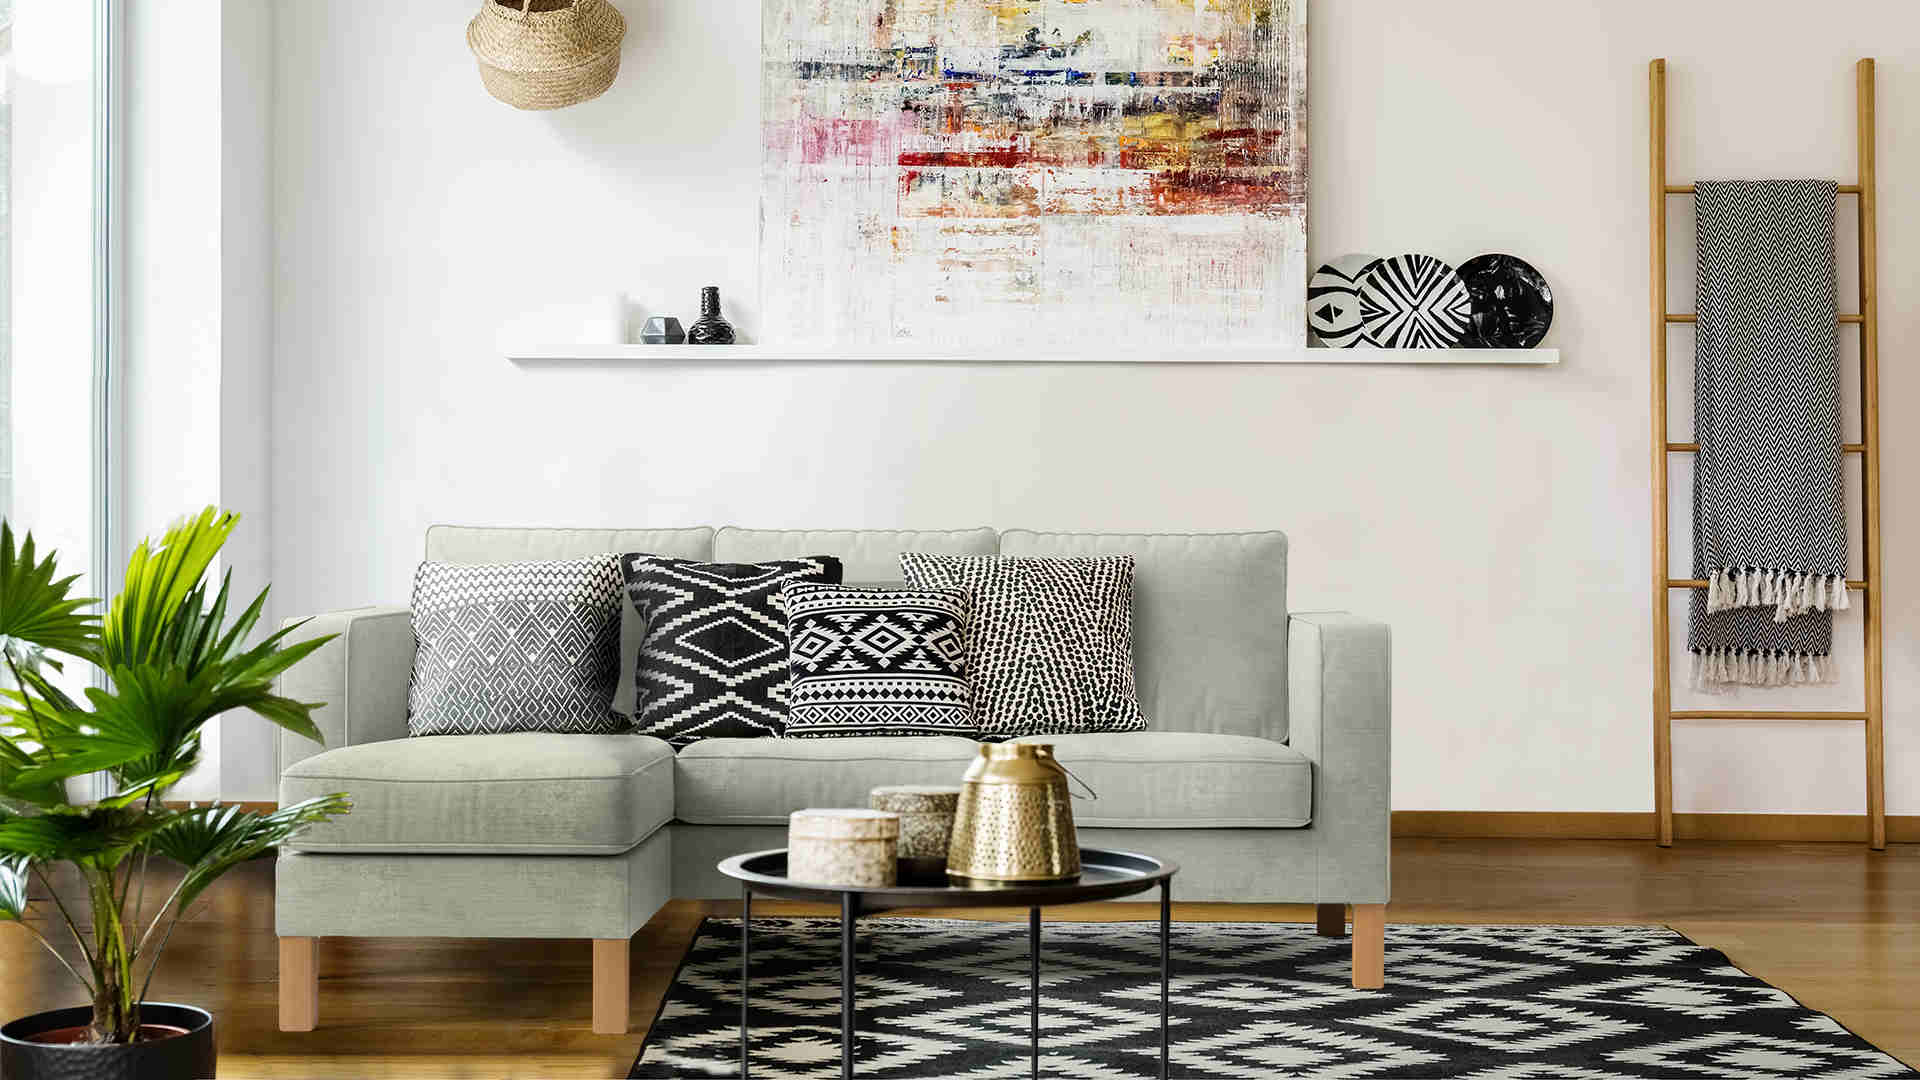 A modern living room with a light gray sectional sofa adorned with patterned cushions. A large abstract painting hangs above a white shelf decorated with vases. A ladder shelf holds blankets, and a potted plant sits beside the sofa. A black-and-white rug covers the floor.